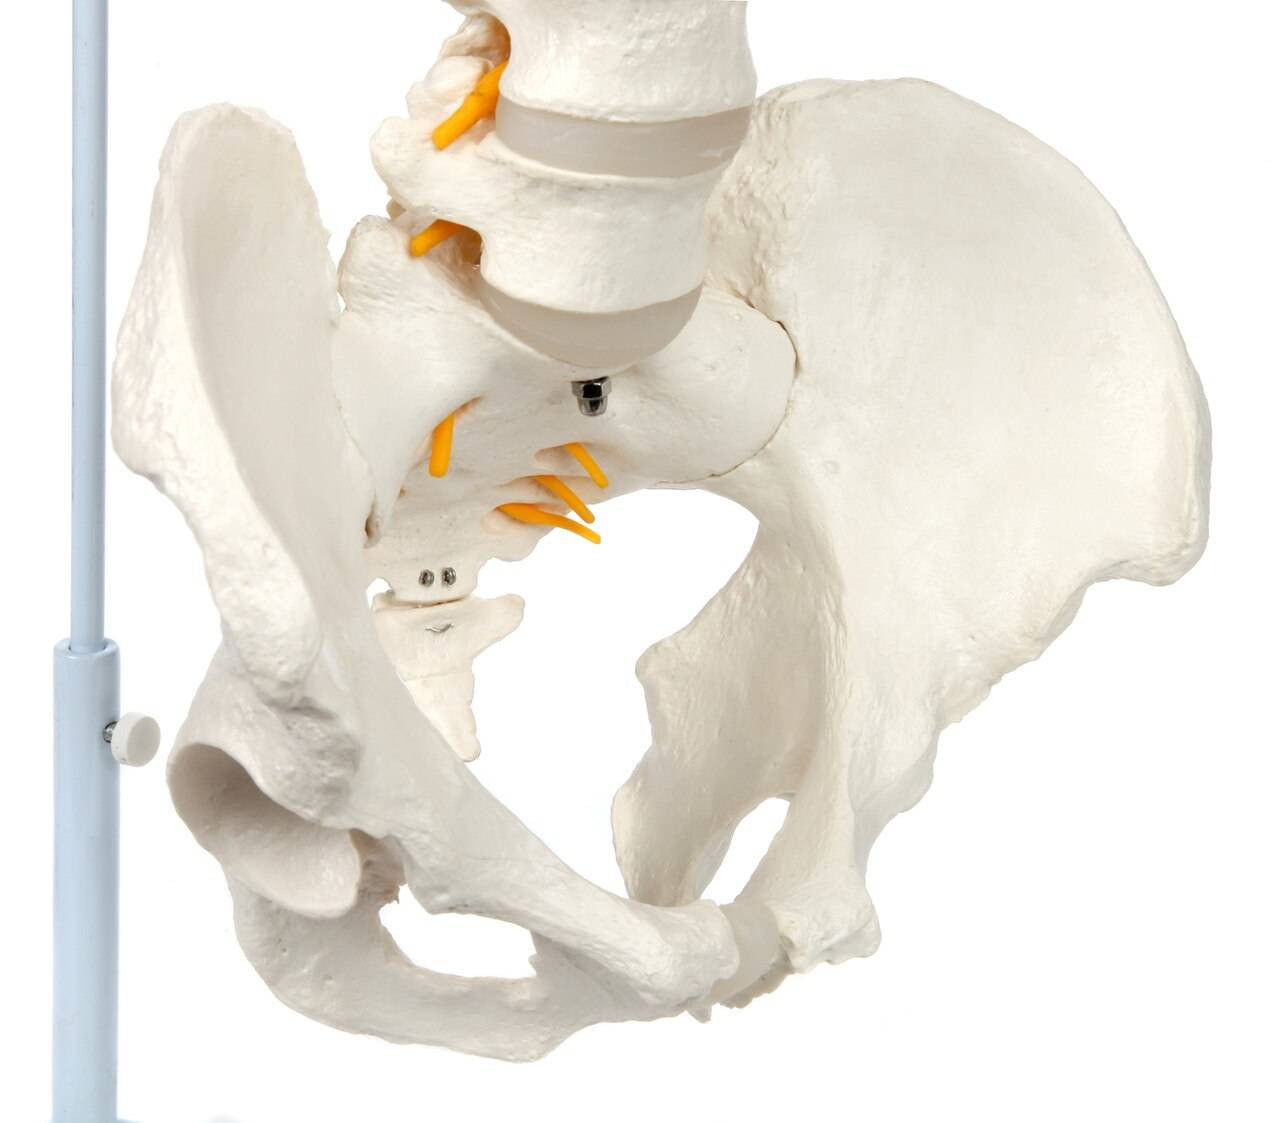 Evotech Scientific Life Size Anatomical Spine Model with Vertebrae, Nerves, Arteries, Lumbar Column, and Male Pelvis